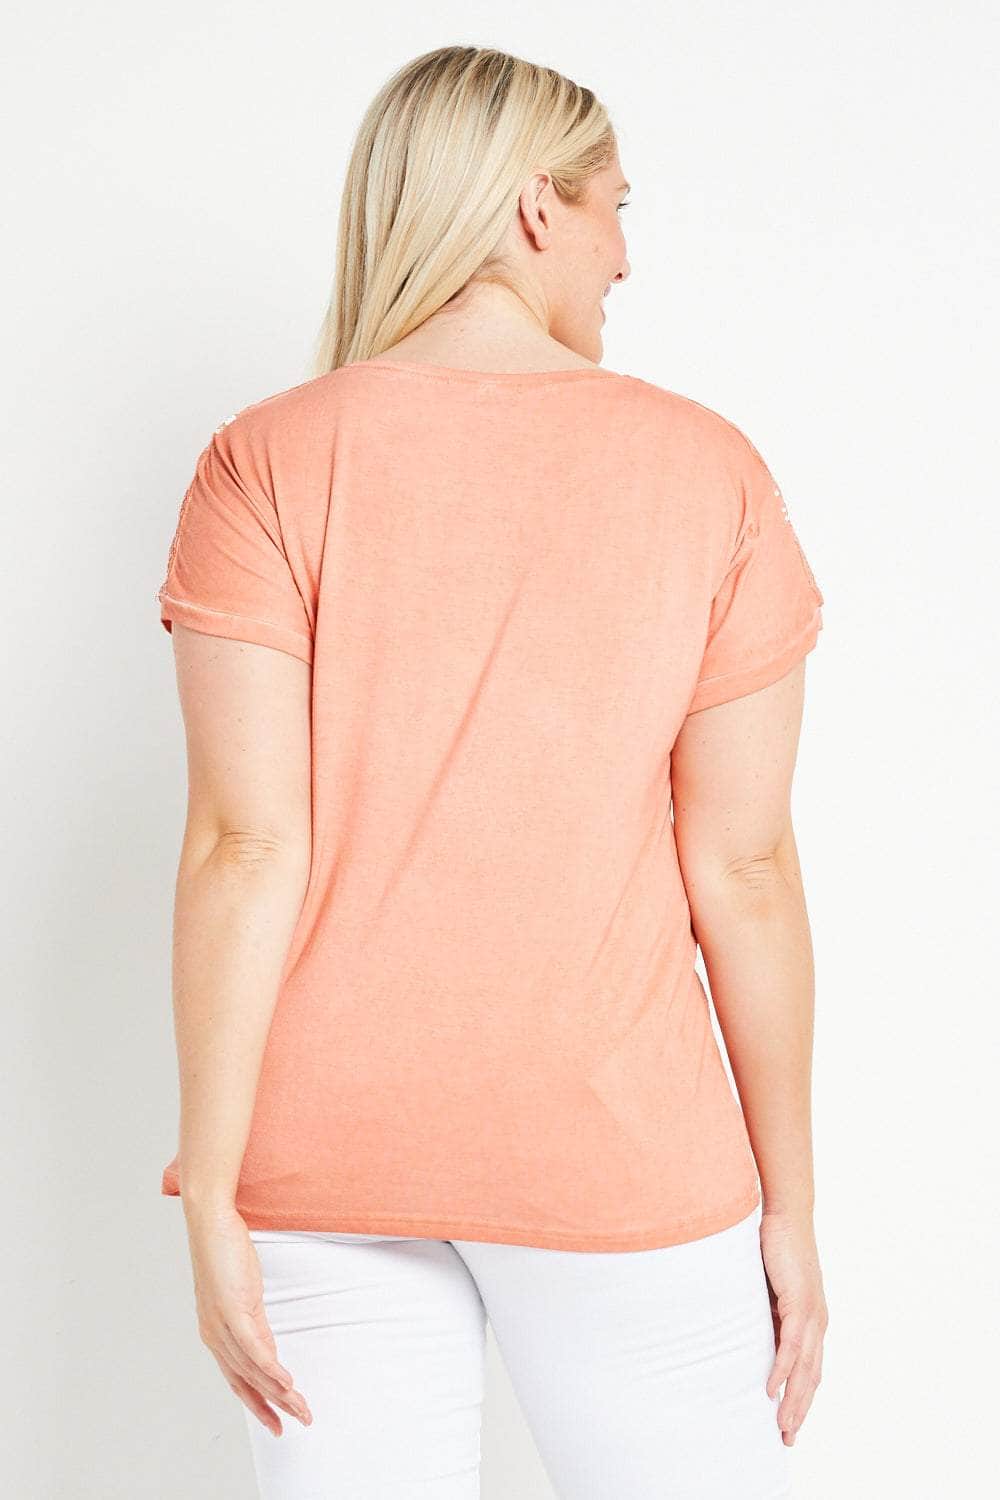 Saloos Top Boxy Cut Round Neck Top